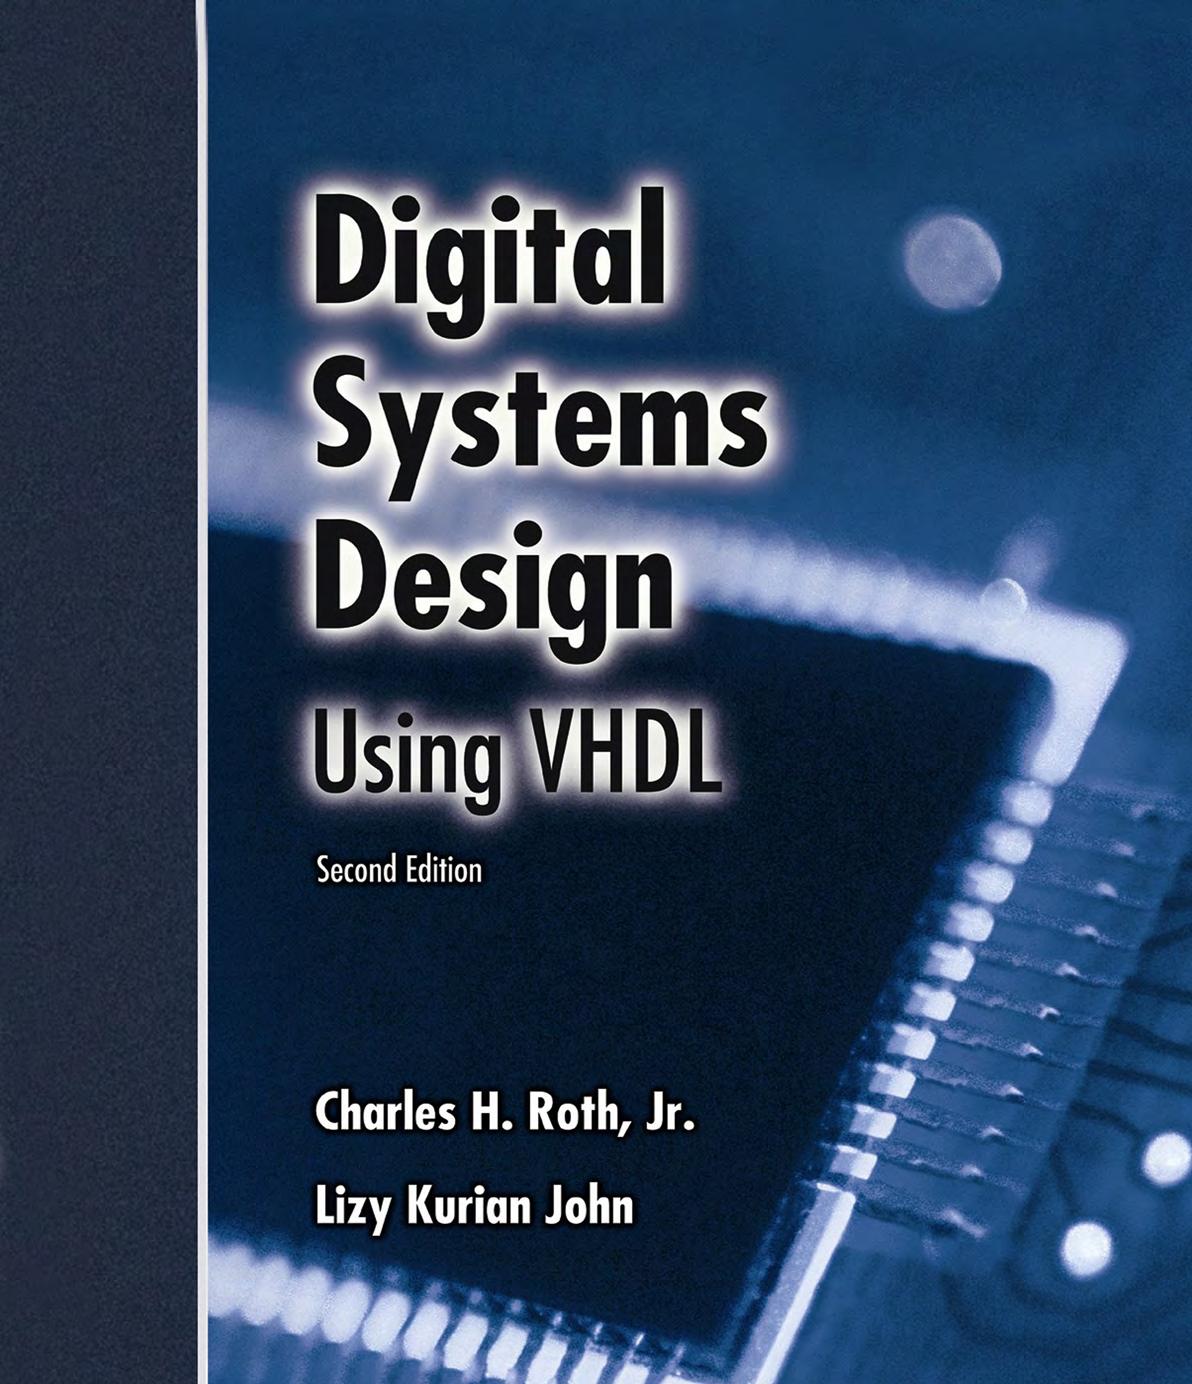 Frank Vahid Digital Design With Rtl Design Vhdl And